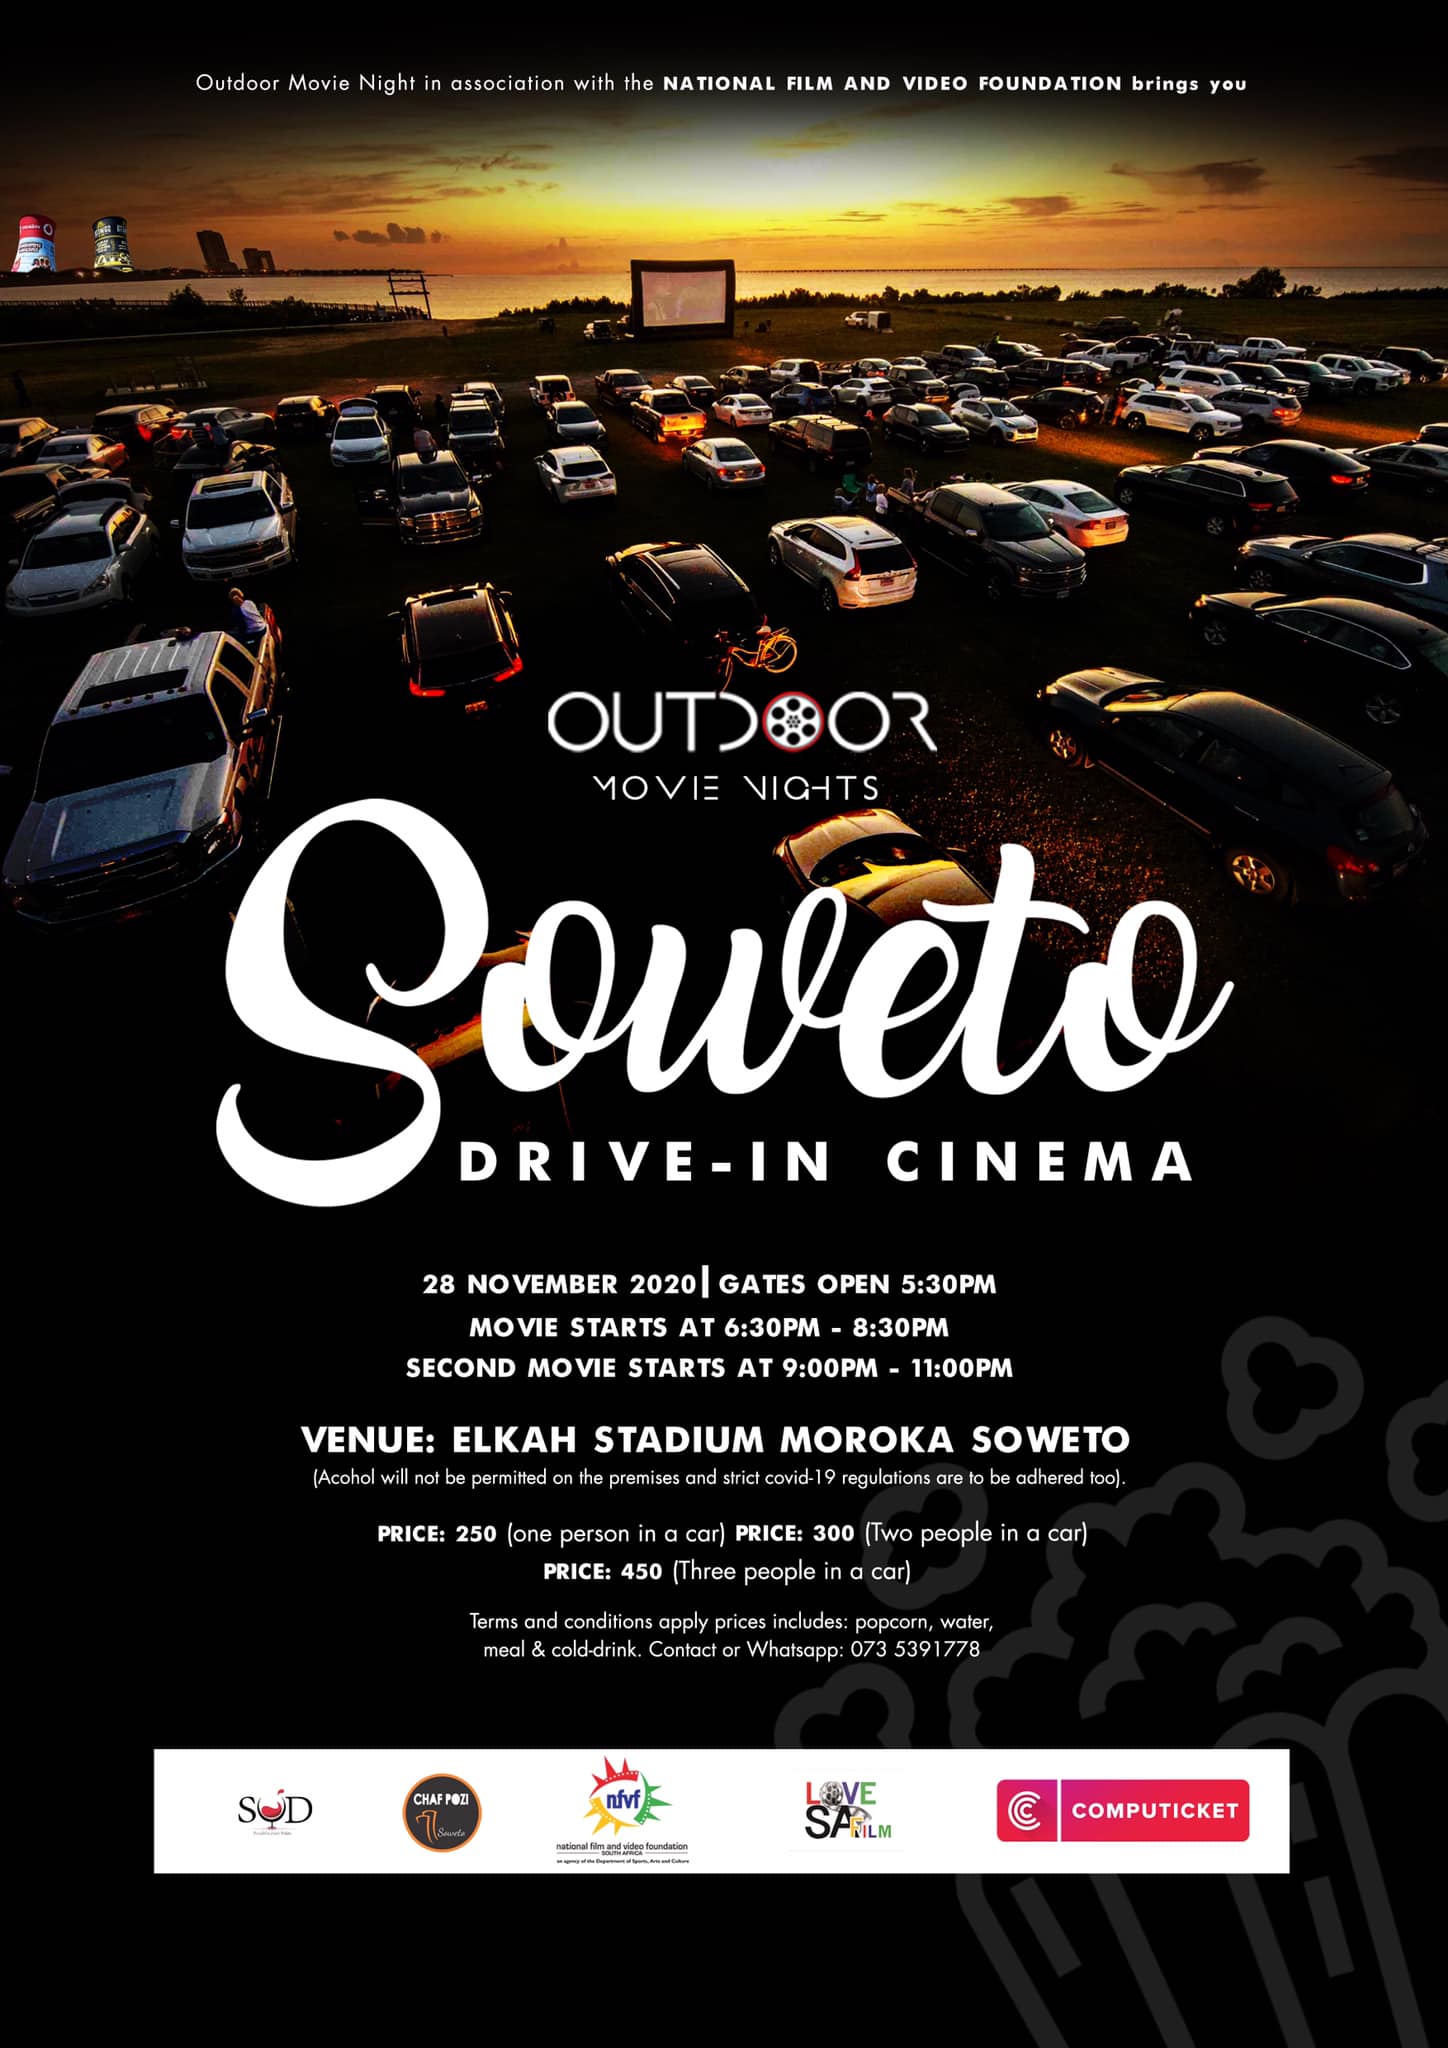 Experience The Soweto Drive-In